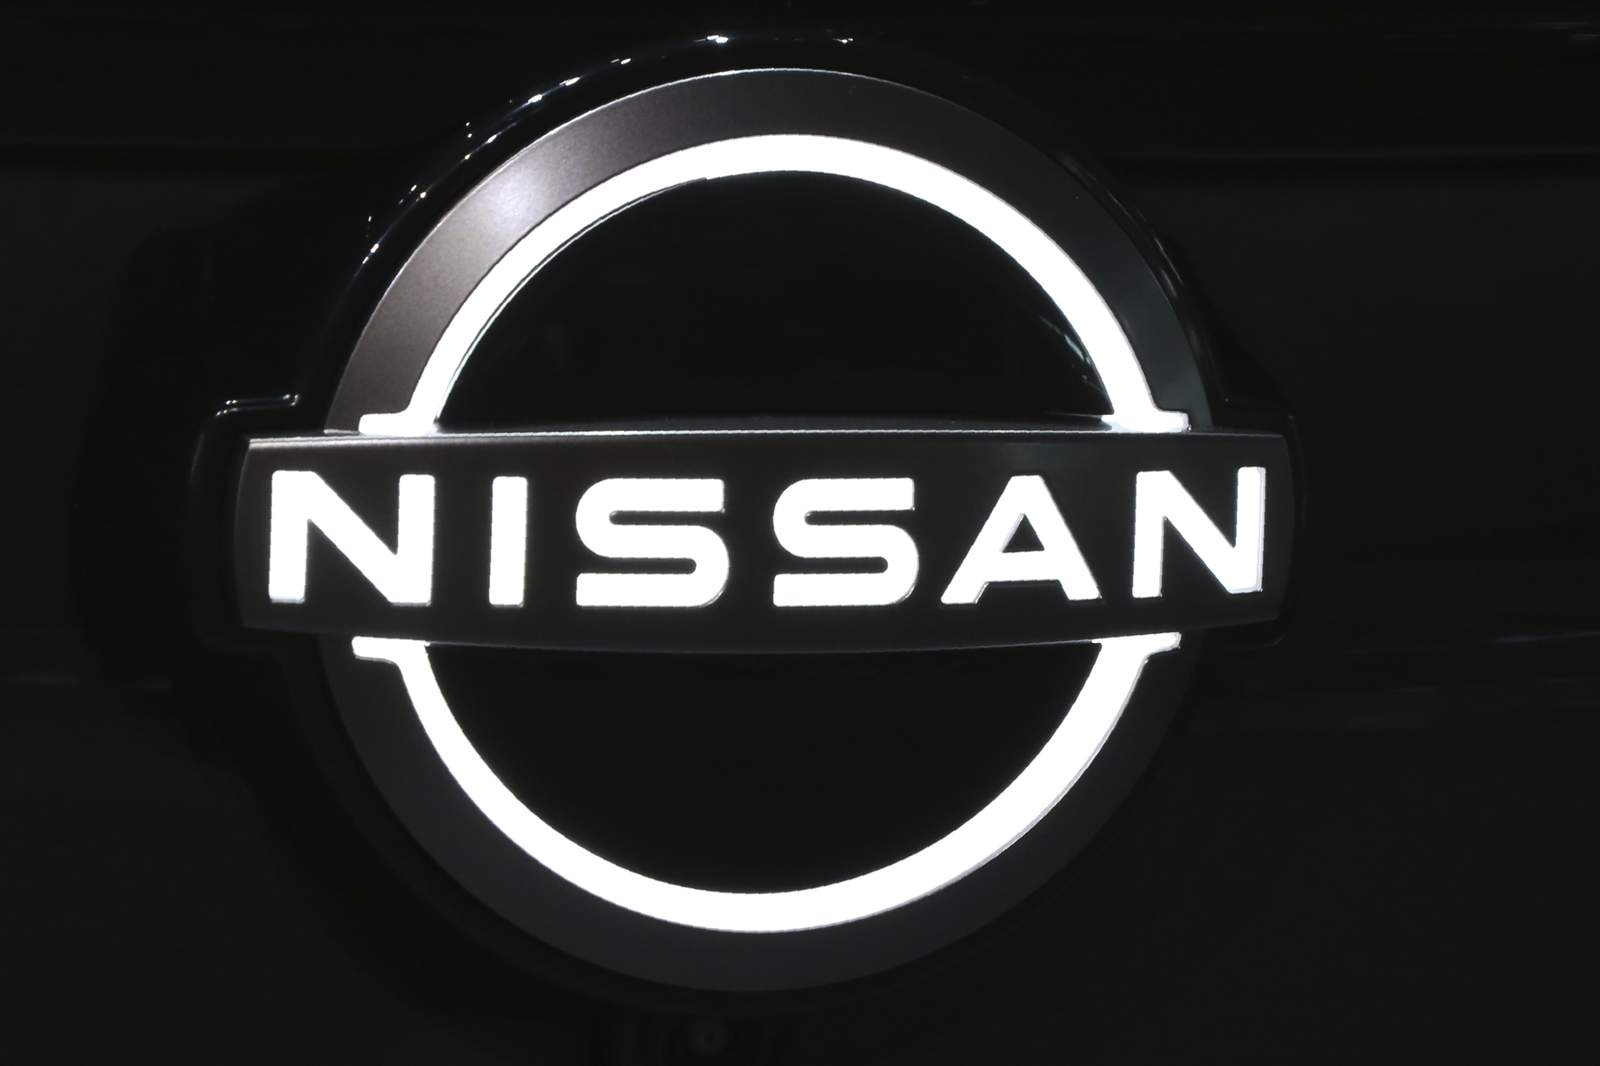 Nissan pulls out of Trump emissions fight with California